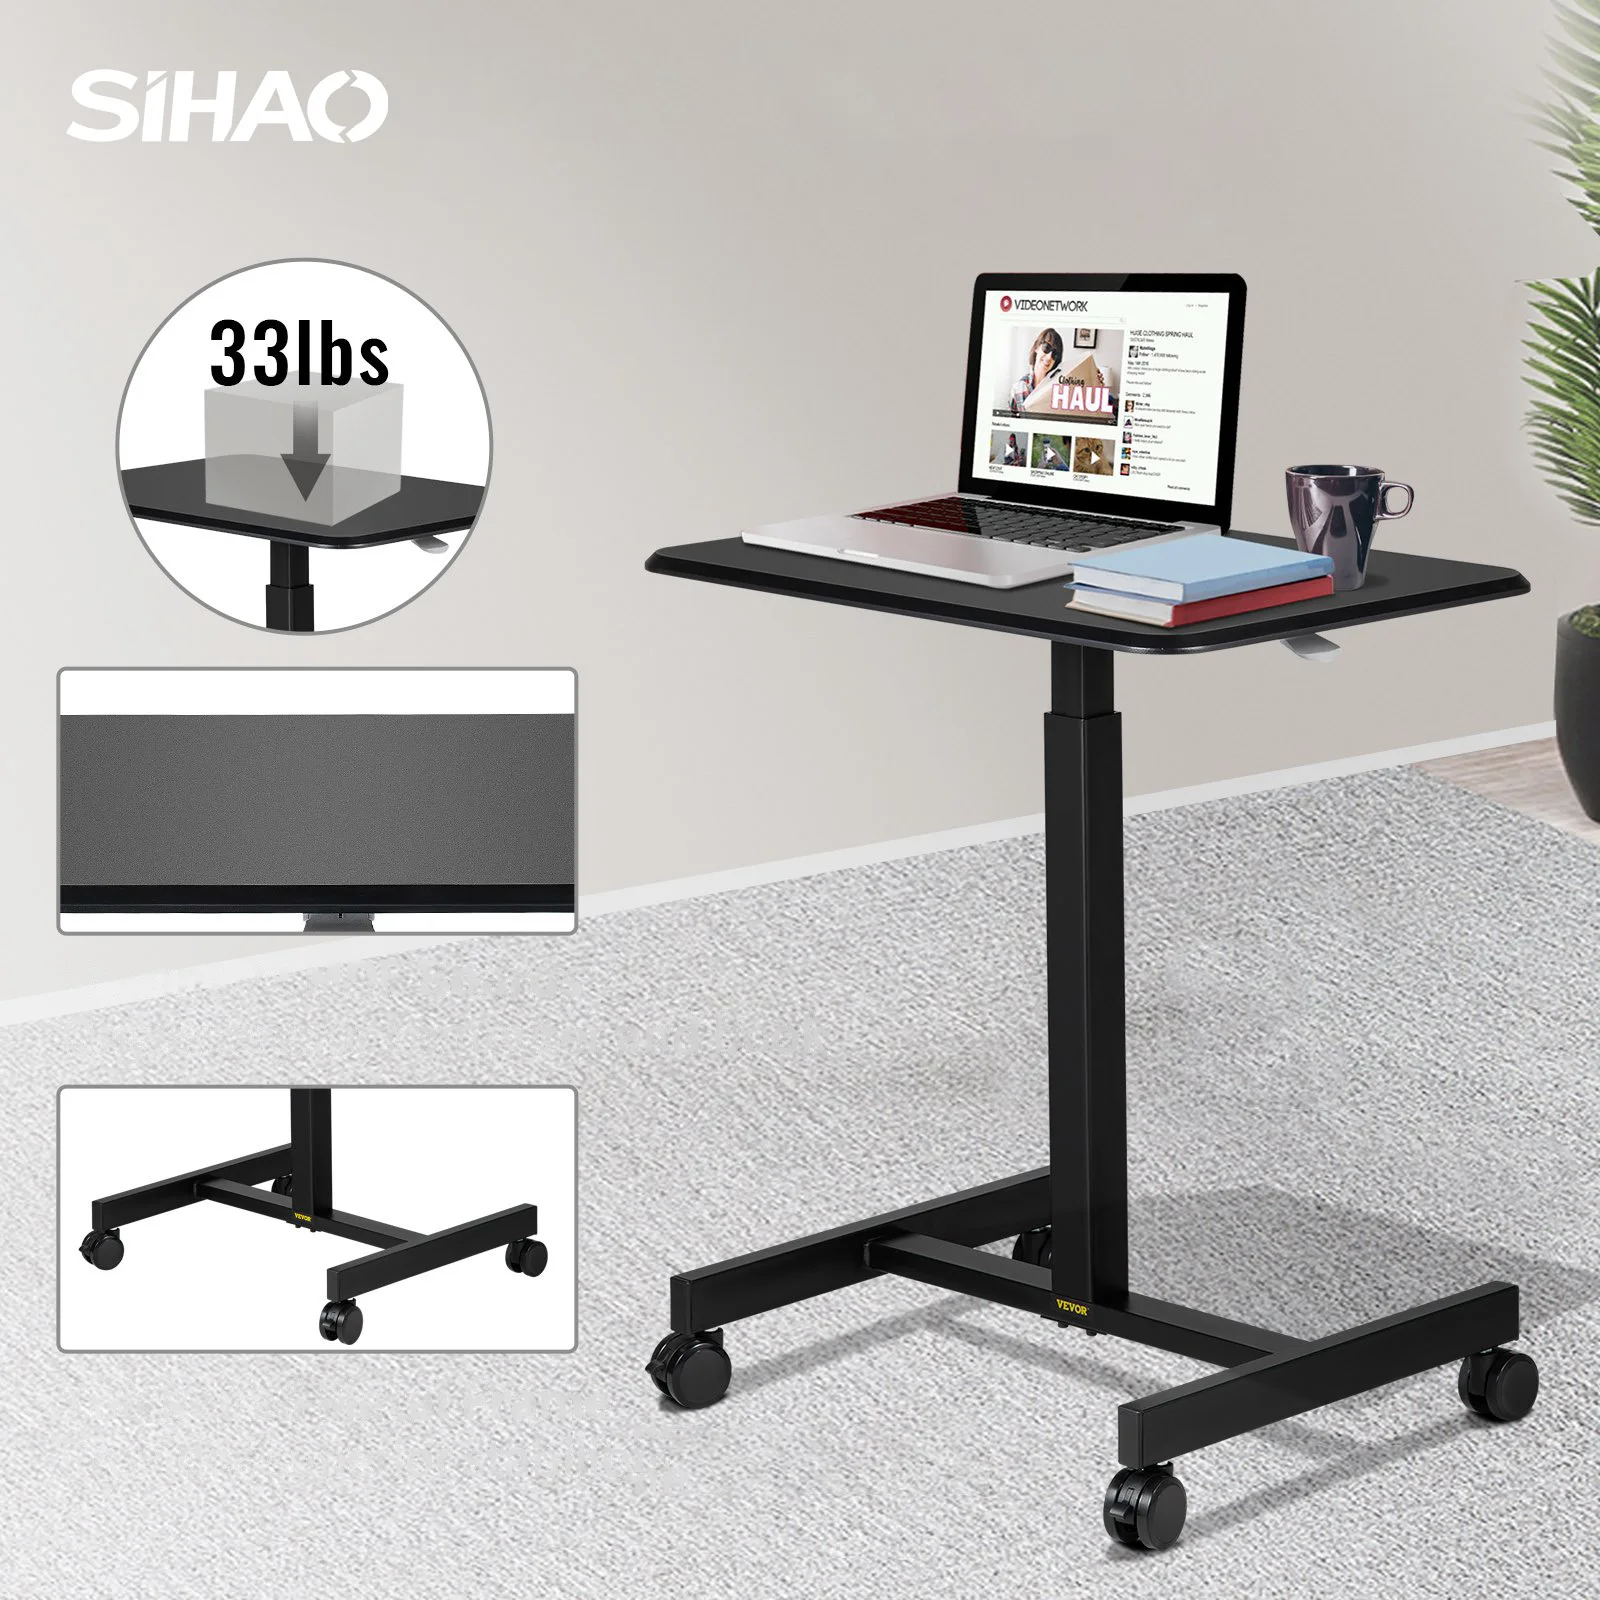 Sihao Adjustable Mobile Laptop Desk Rolling Computer Table Lifting Mobile Desk Up And Down Load-bearing Capacity 33 Lbs Black